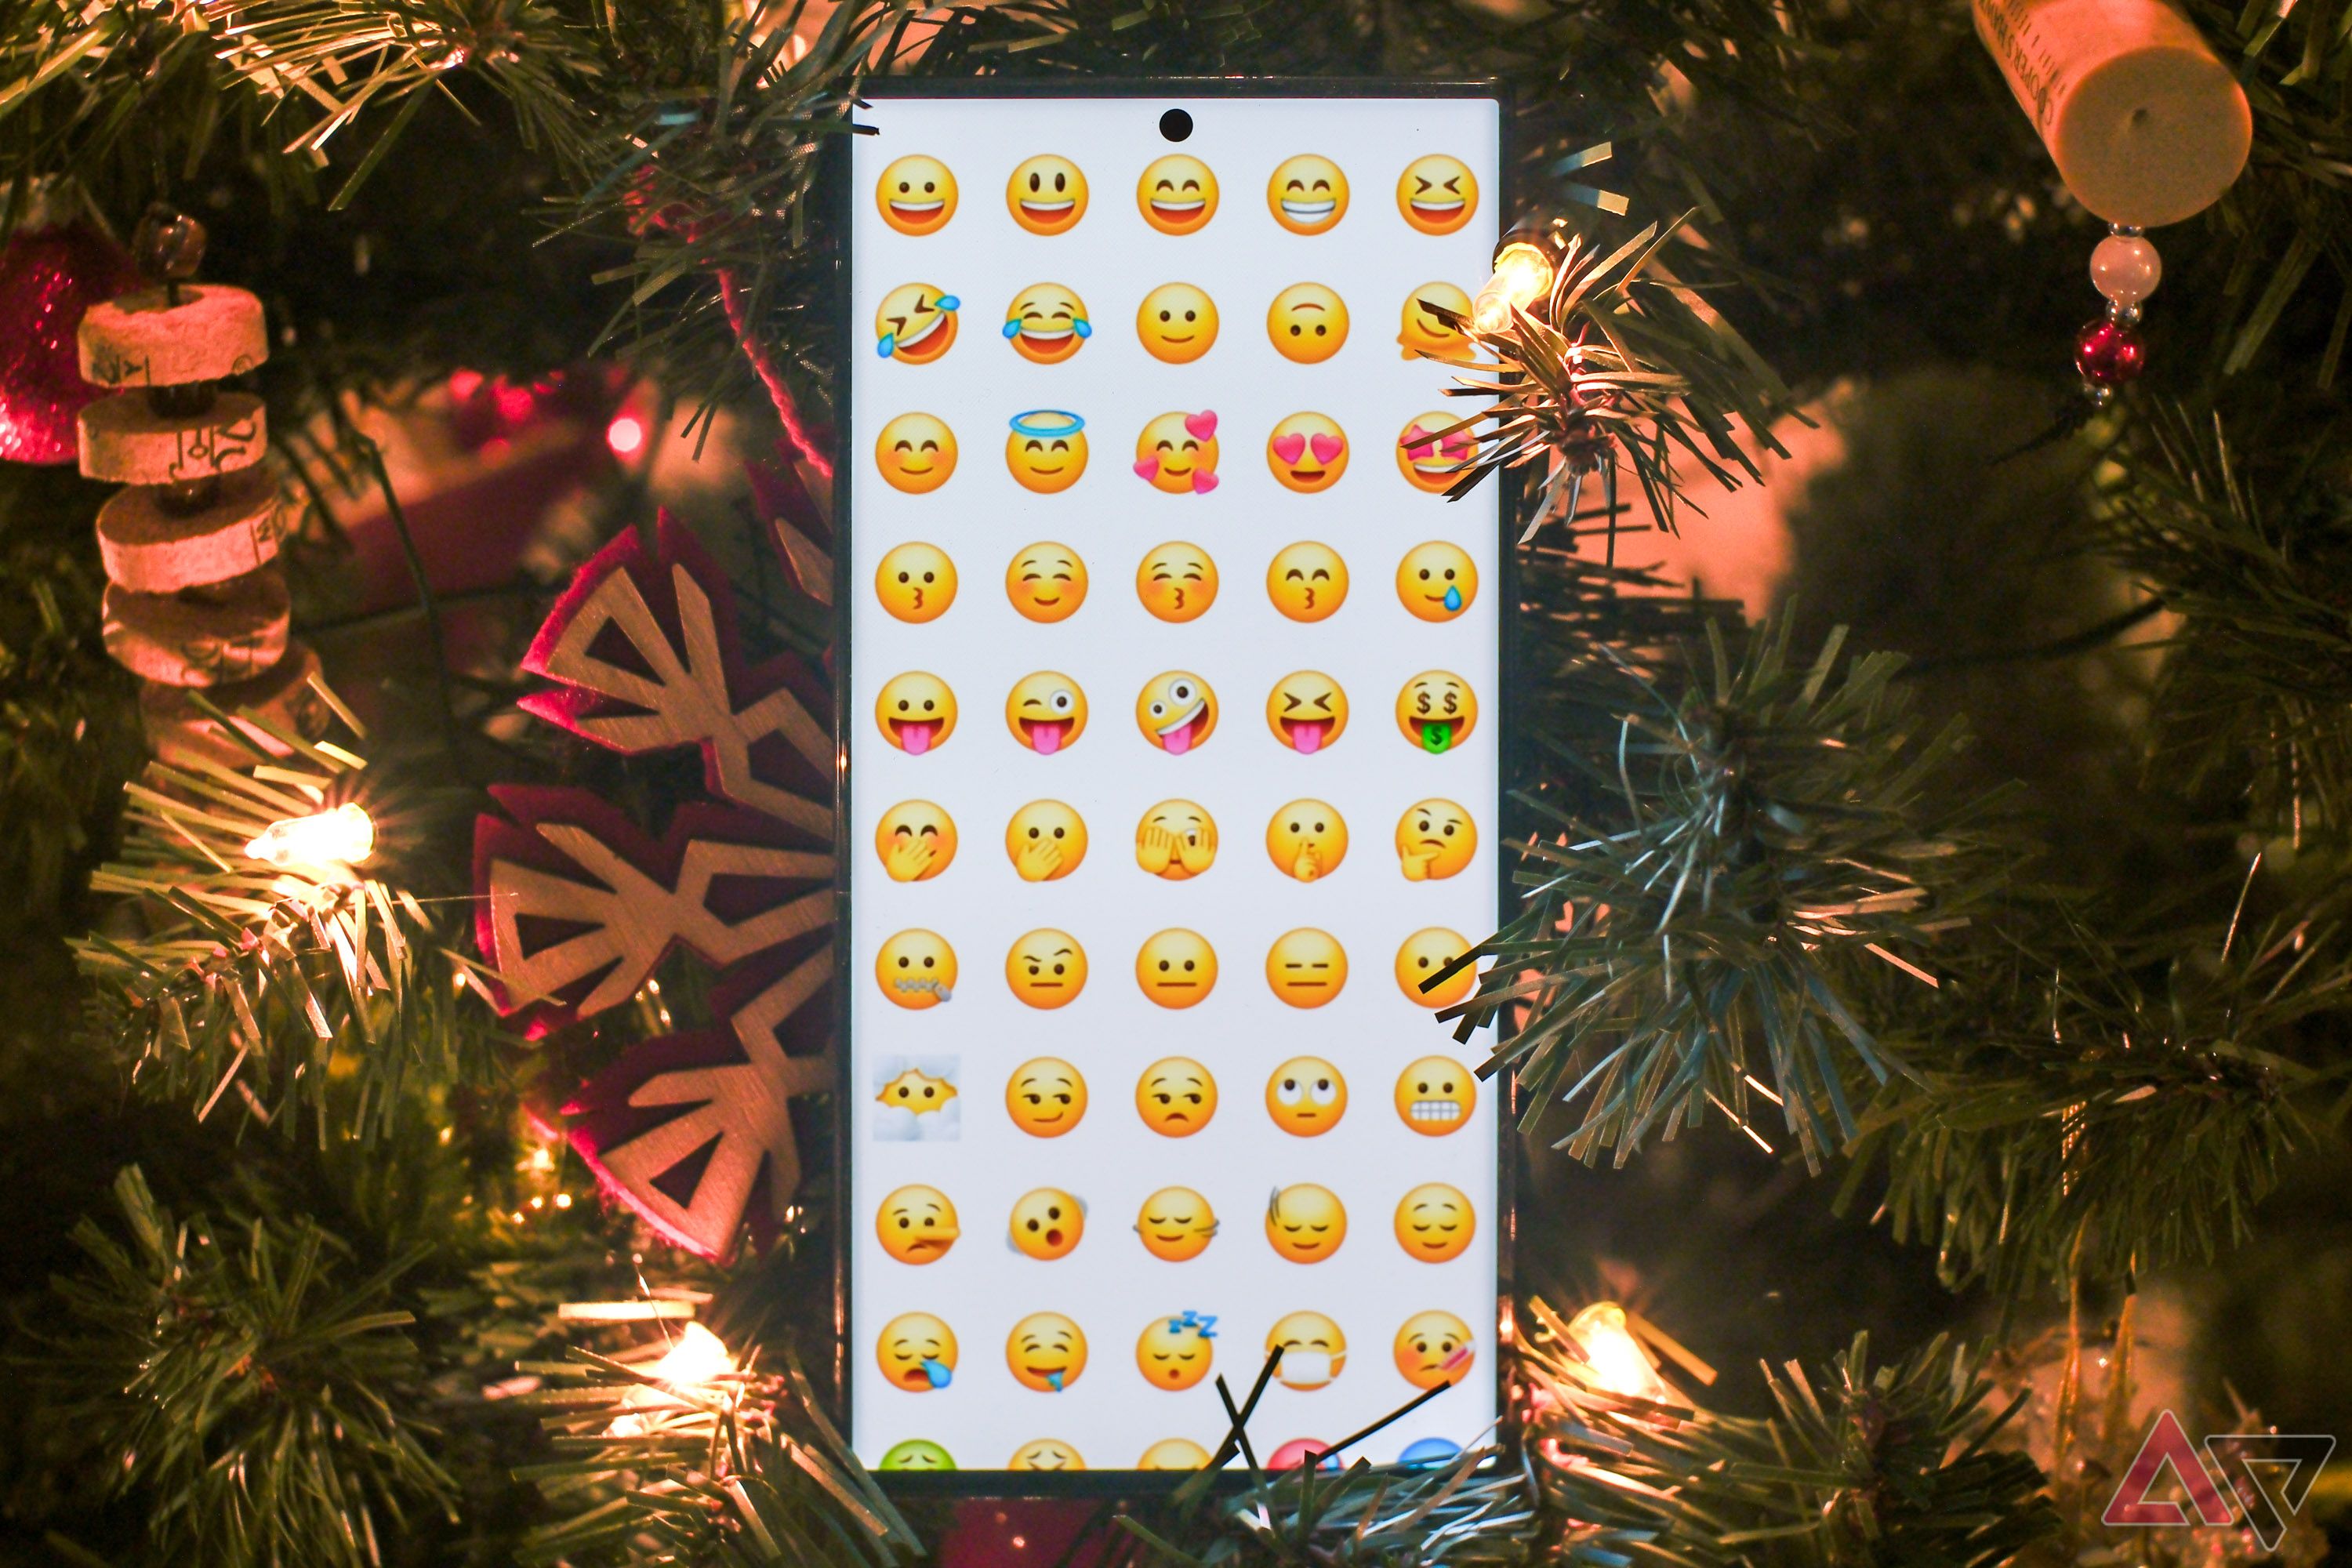 A smartphone showing a grid of emojis, surrounded by holiday decorations